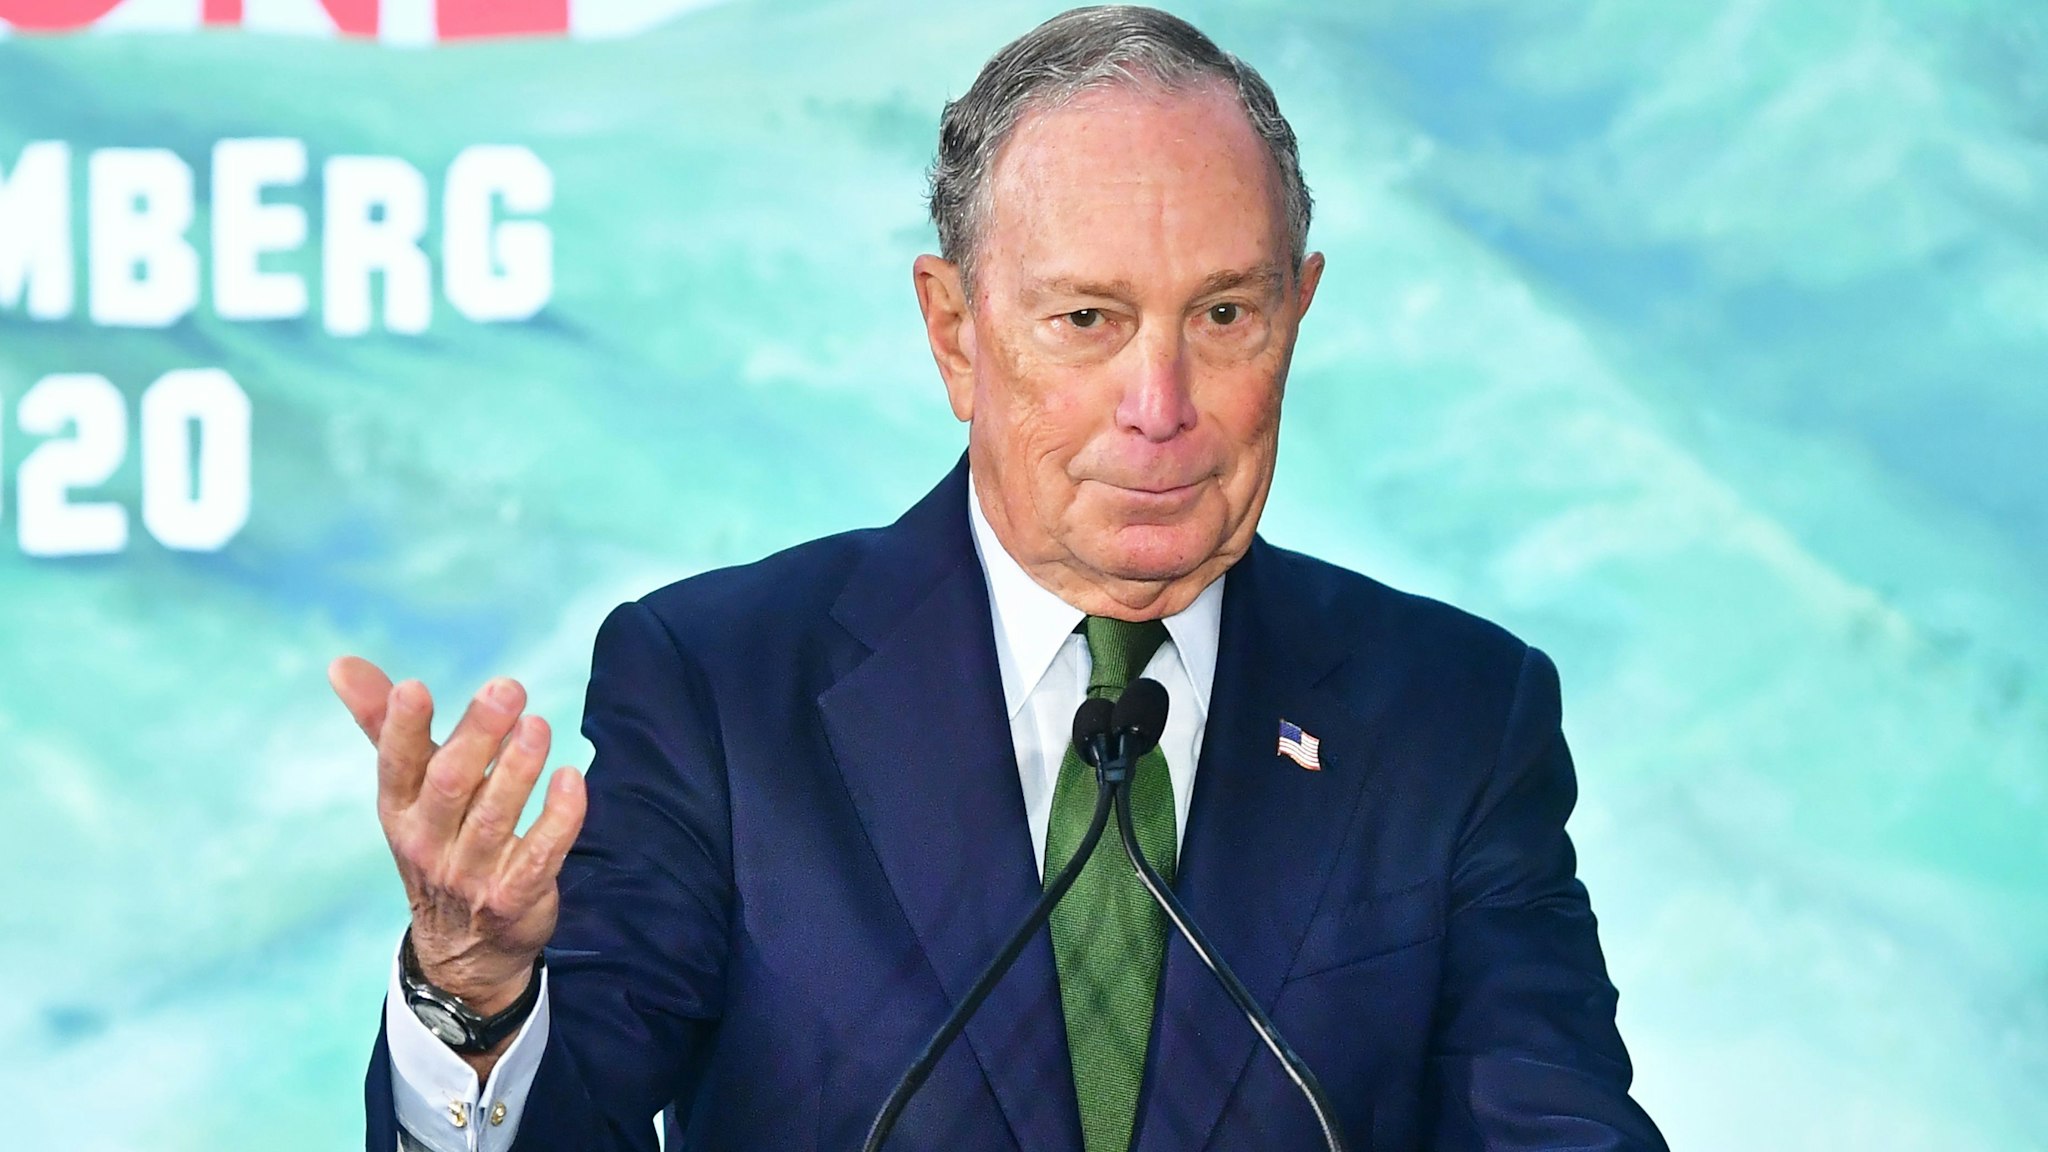 Democratic Presidential candidate Mike Bloomberg addresses his suporters at the opening of a Los Angeles field office for his presidential campaign on January 6, 2020 in Los Angeles, California.